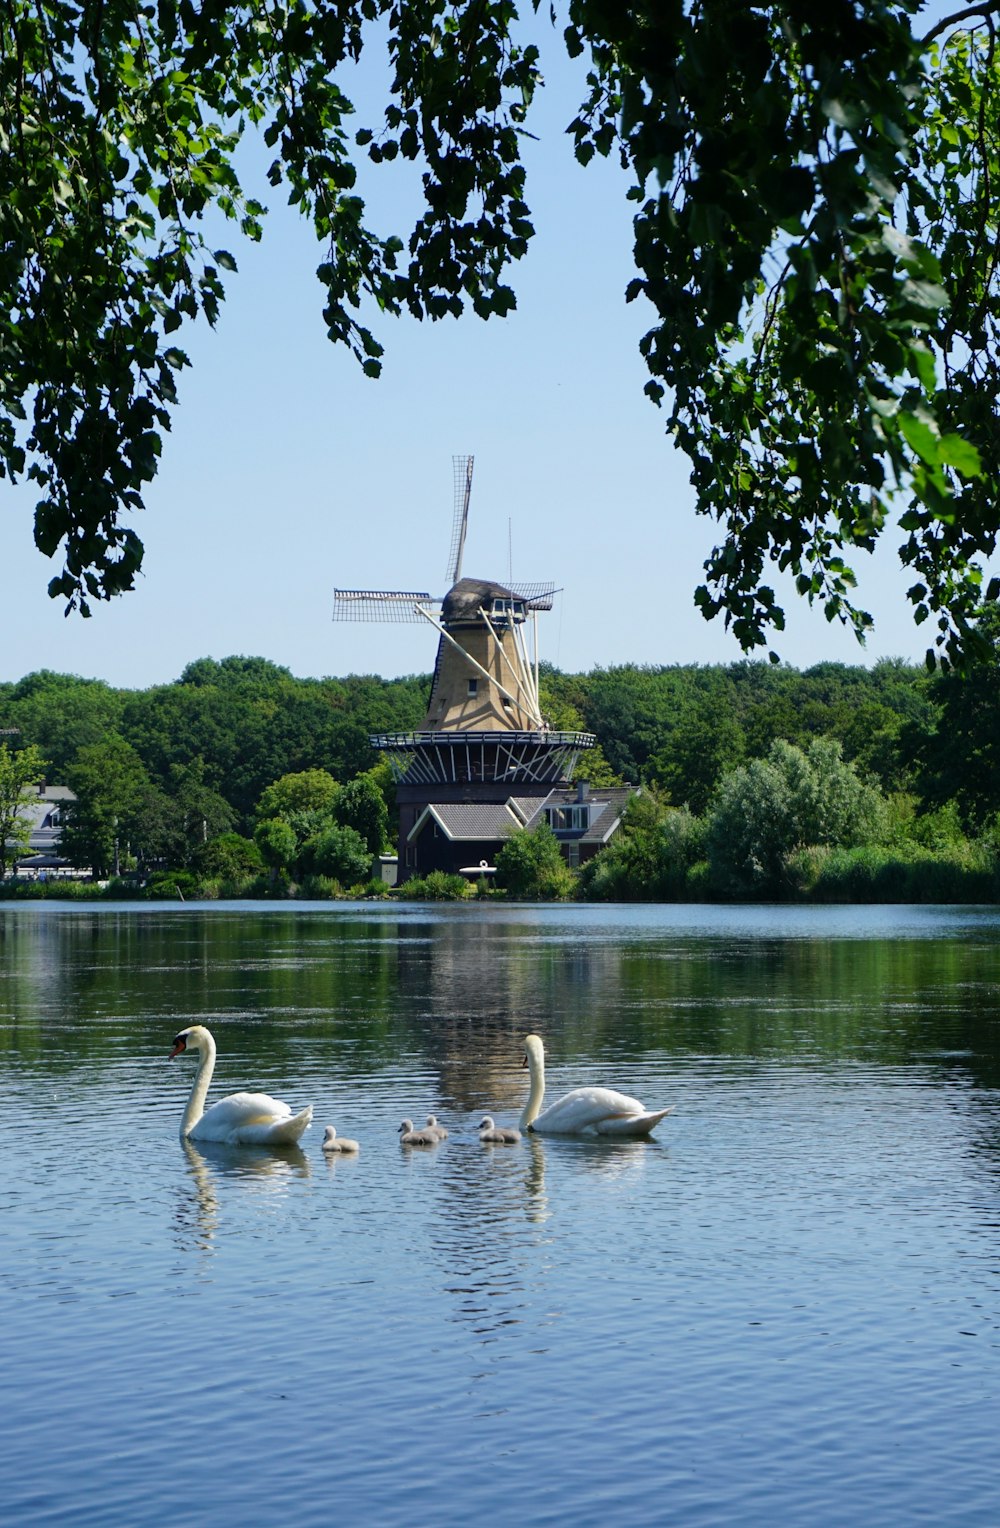 a group of swans swimming in a lake next to a windmill